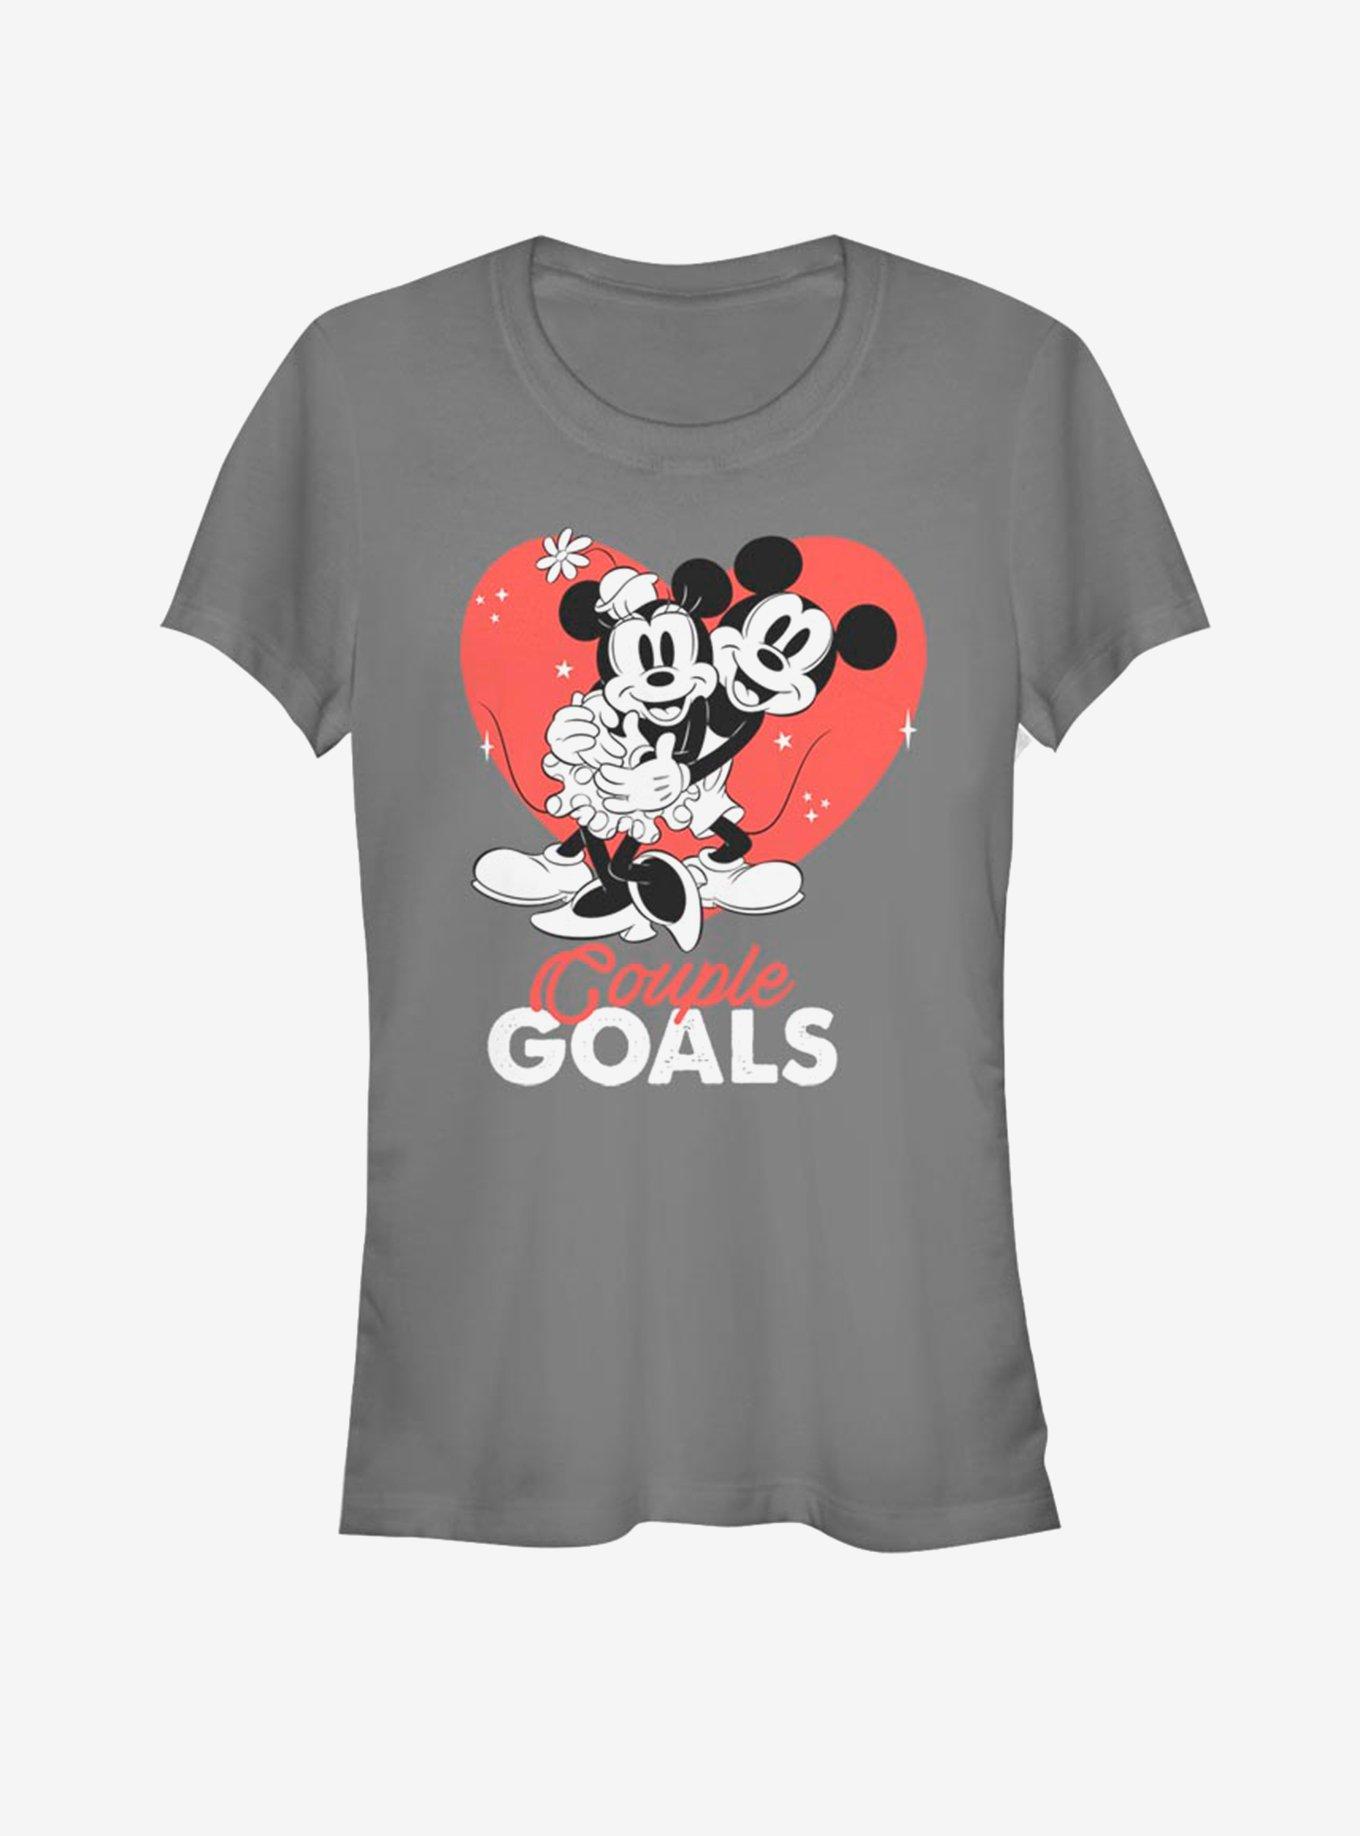 Disney Mickey Mouse & Minnie Mouse Couple Goals Girls T-Shirt, CHARCOAL, hi-res